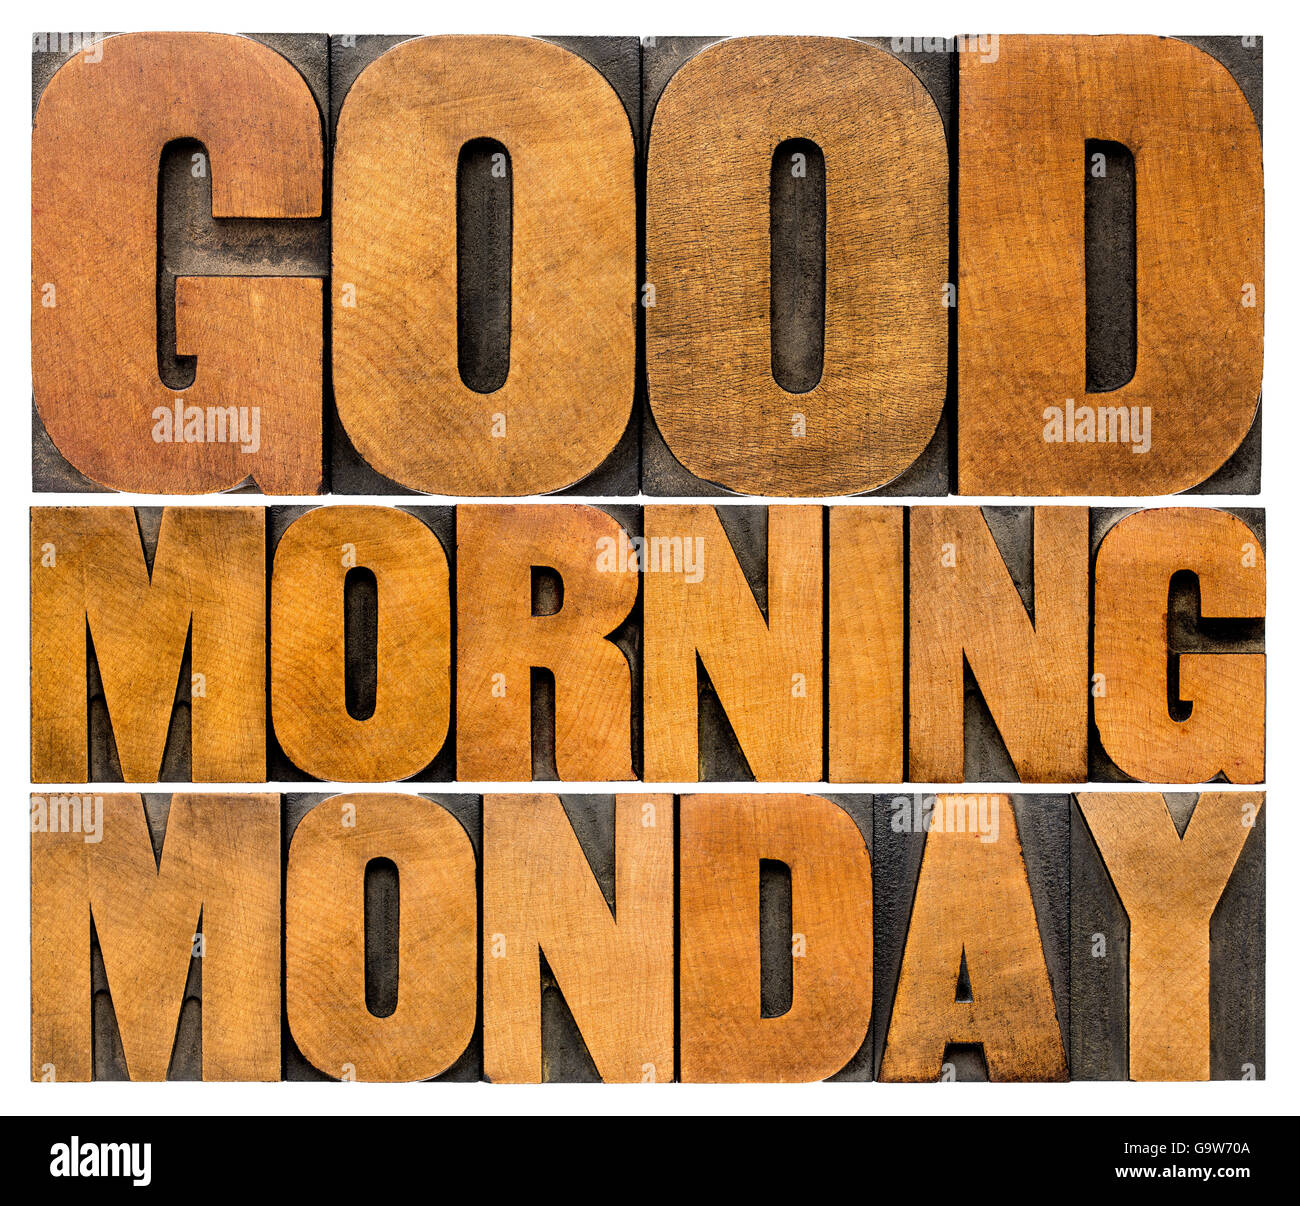 Good Morning Monday word abstract - isolated text in vintage letterpress wood type printing blocks Stock Photo